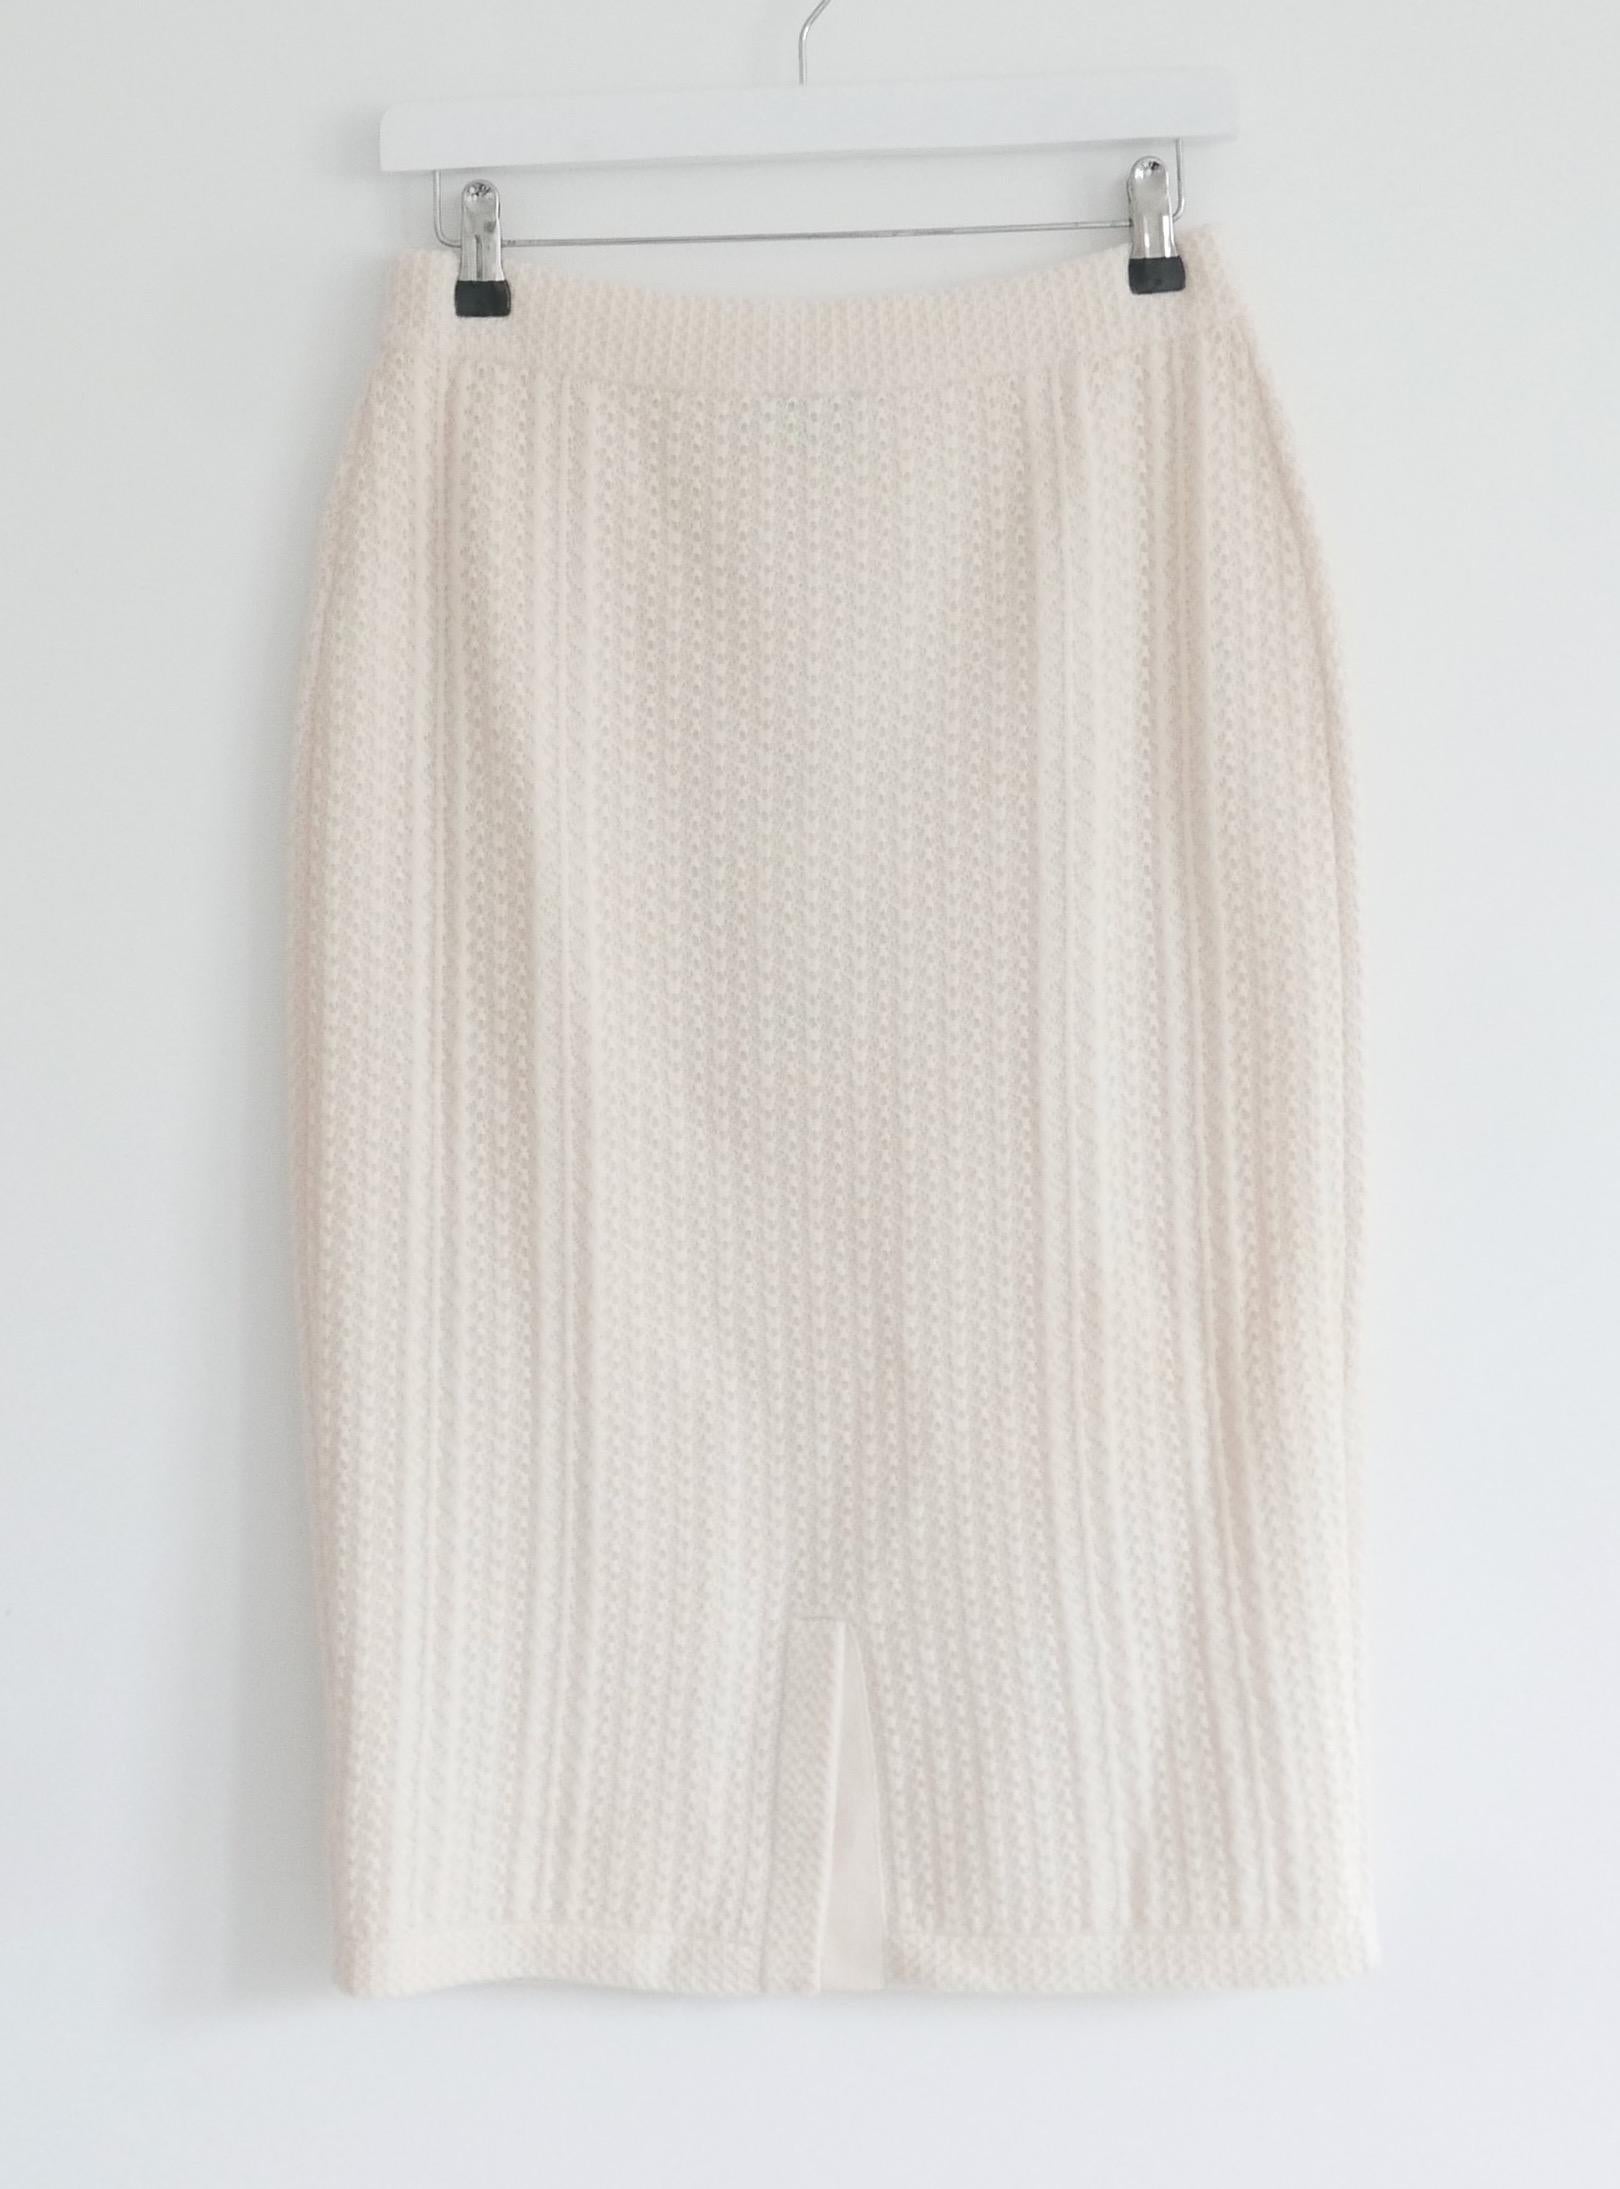 Chanel Fall 2017 Cashmere Knit Midi Pencil Skirt In New Condition For Sale In London, GB